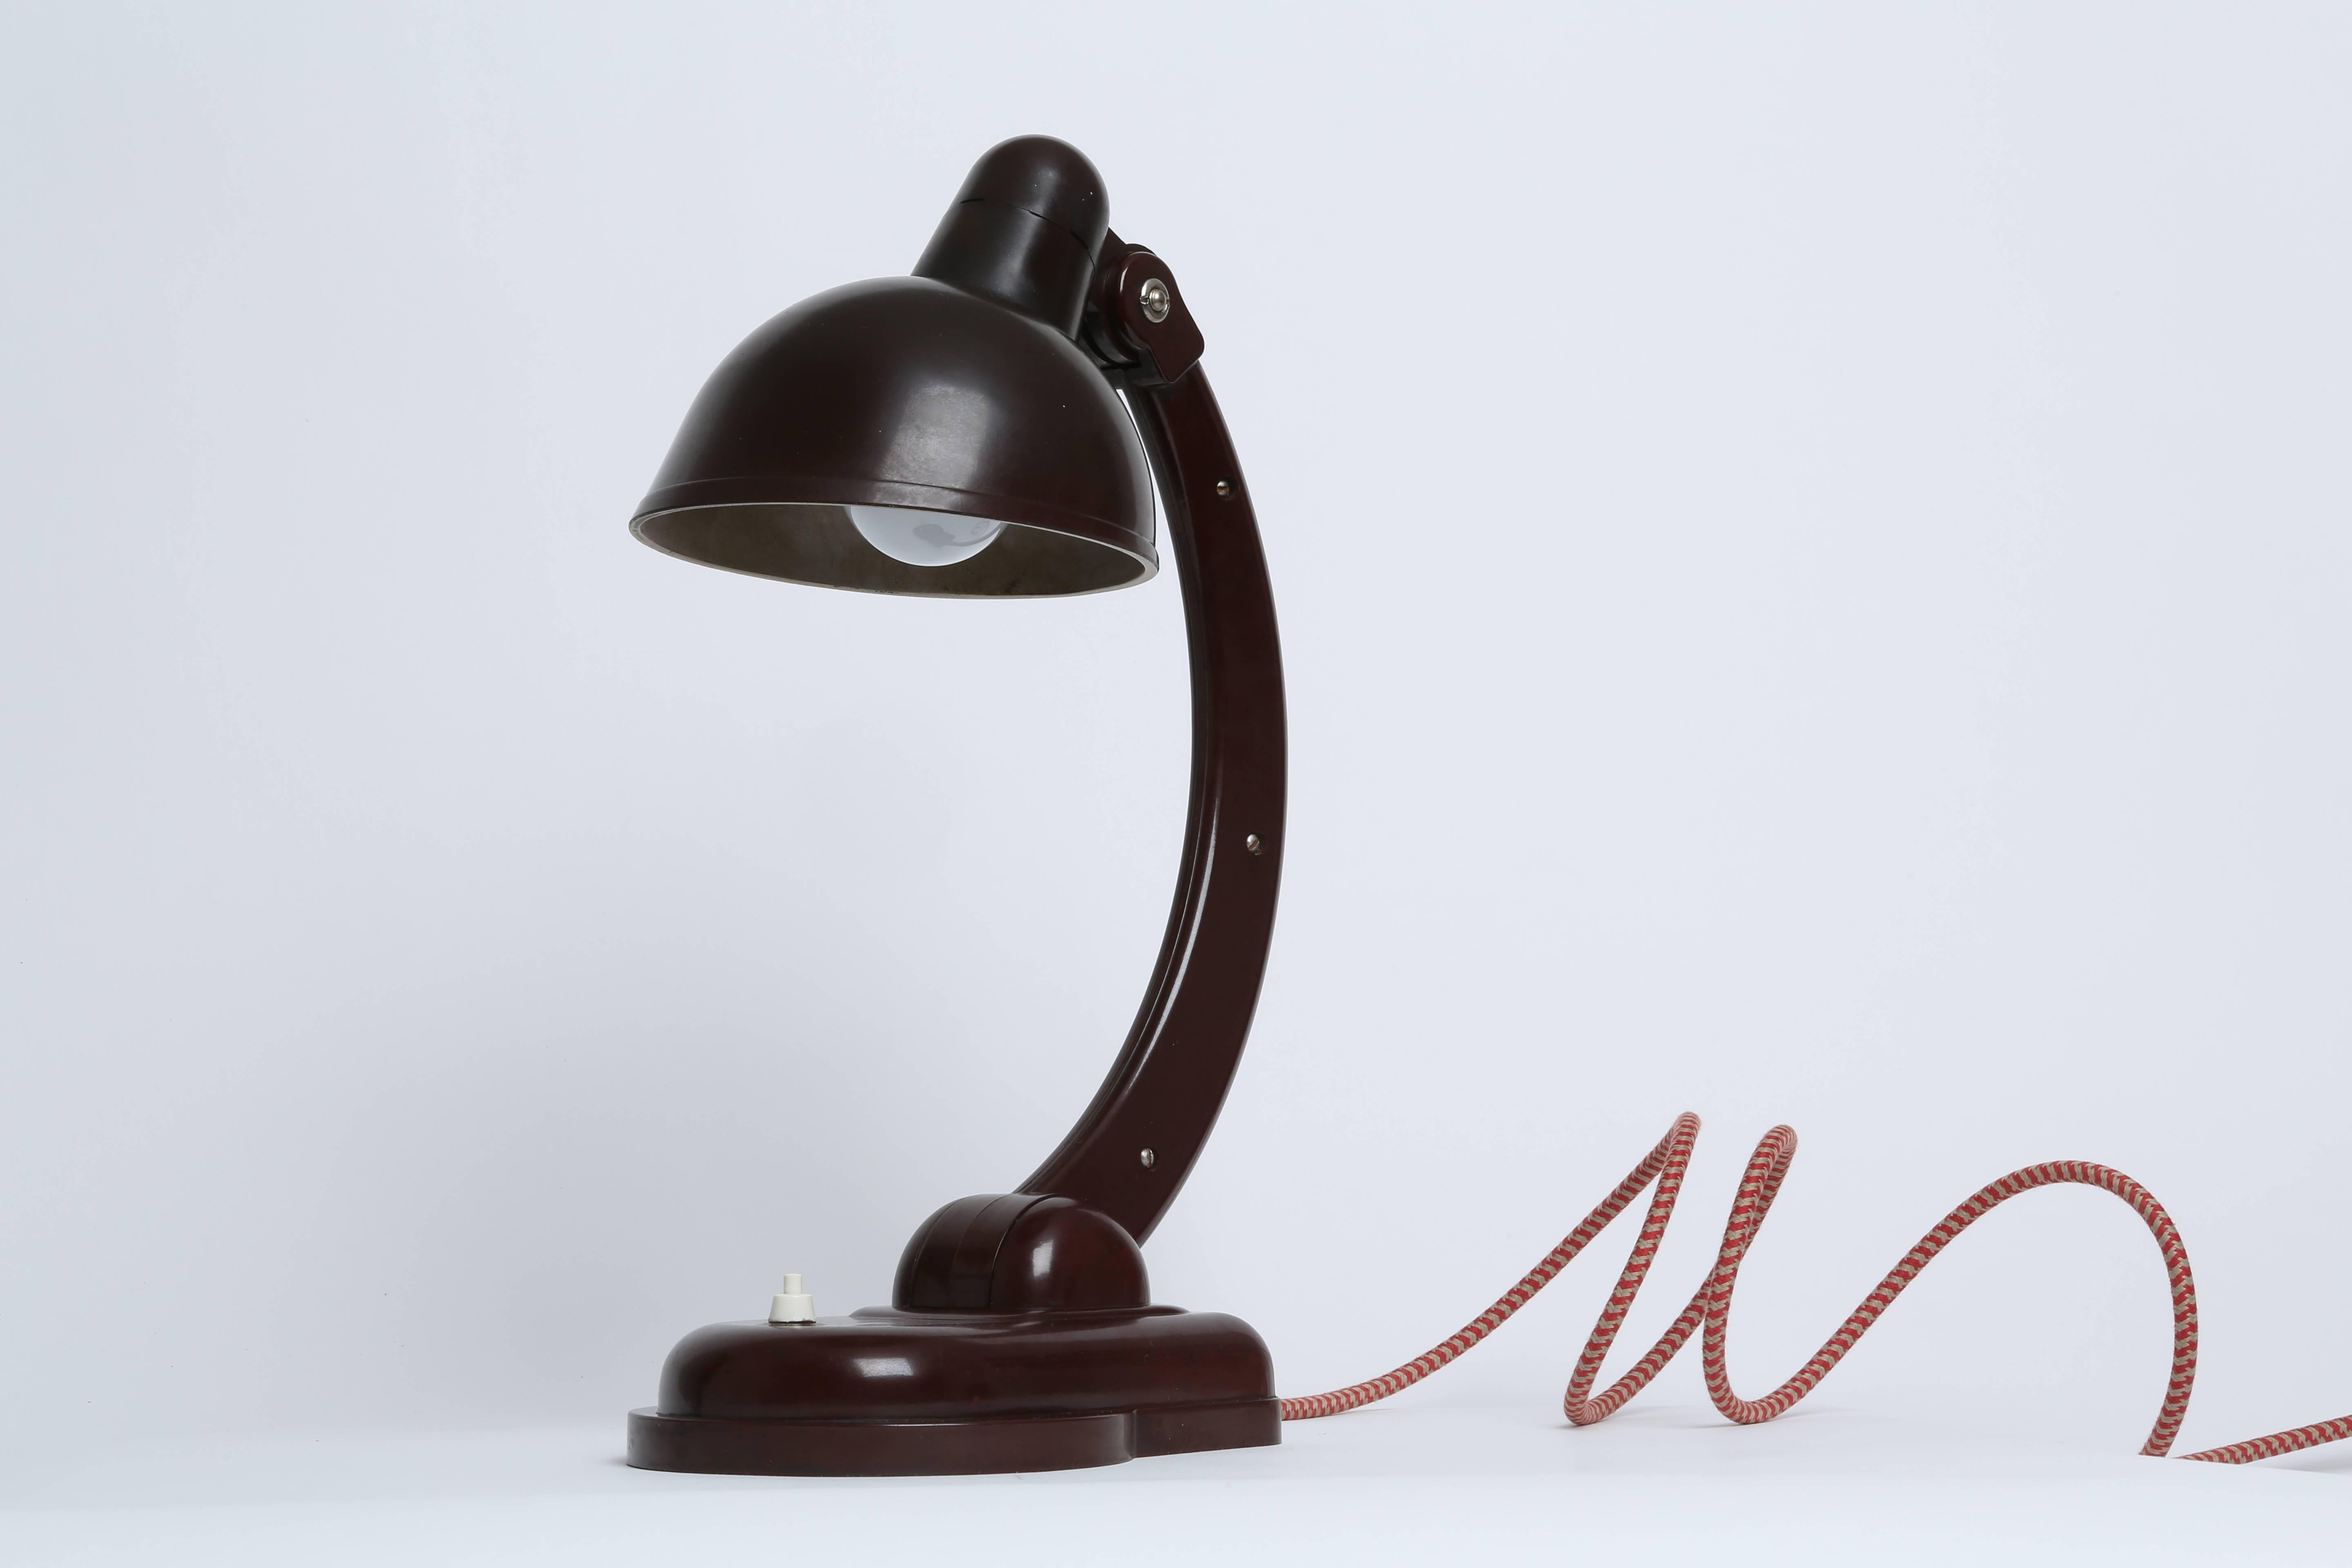 Bakelite table lamp by German designer Christian Dell.
Model Sigma. Produced in Russia in 1930s.